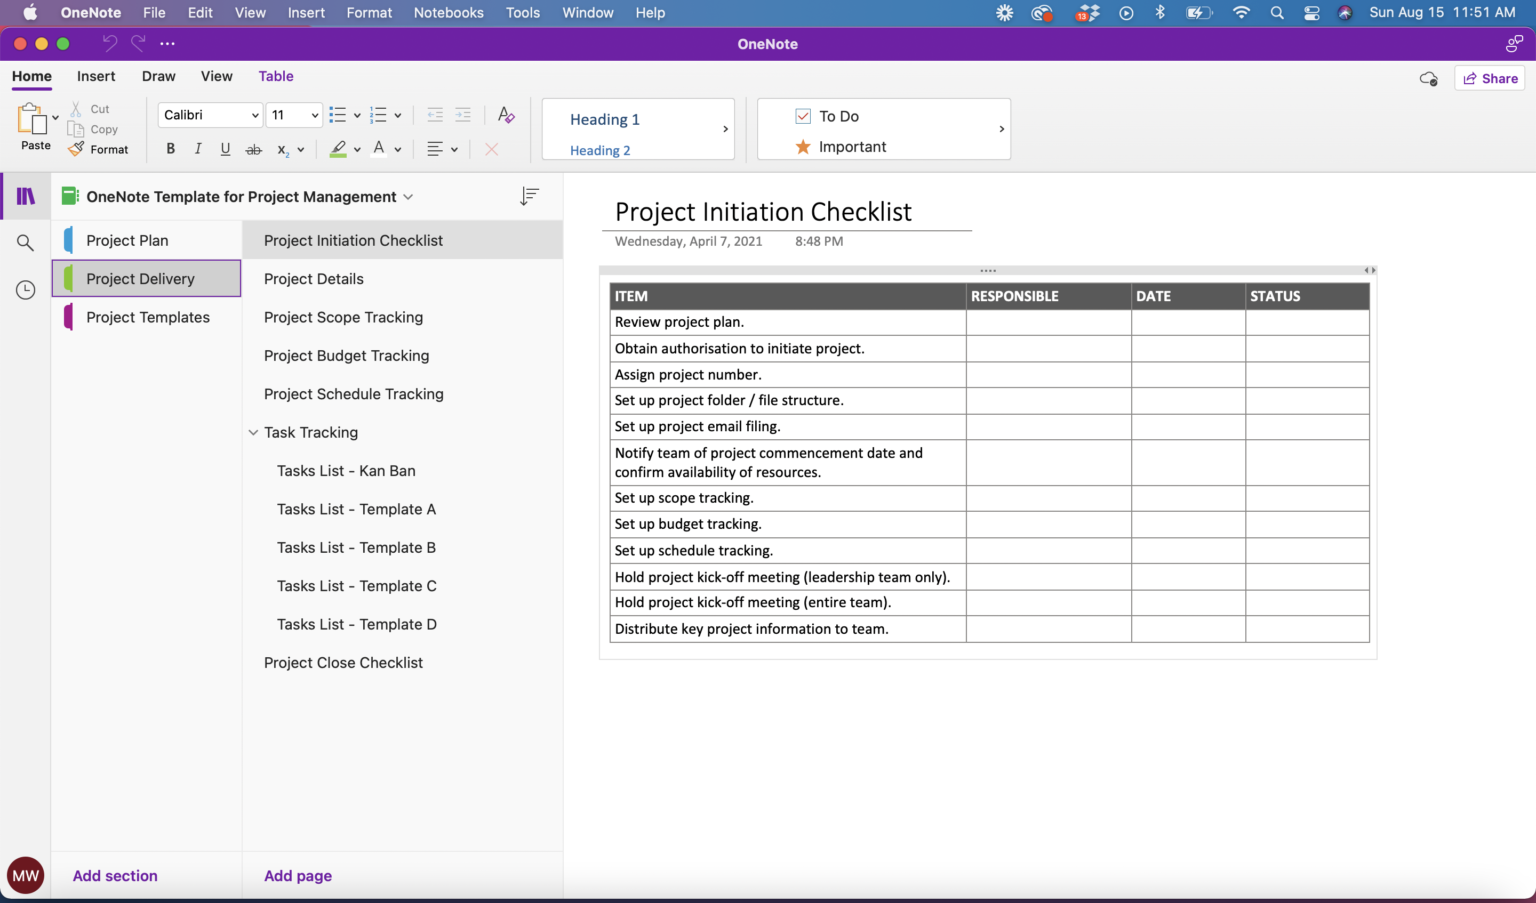 Onenote Project Management Template www inf inet com